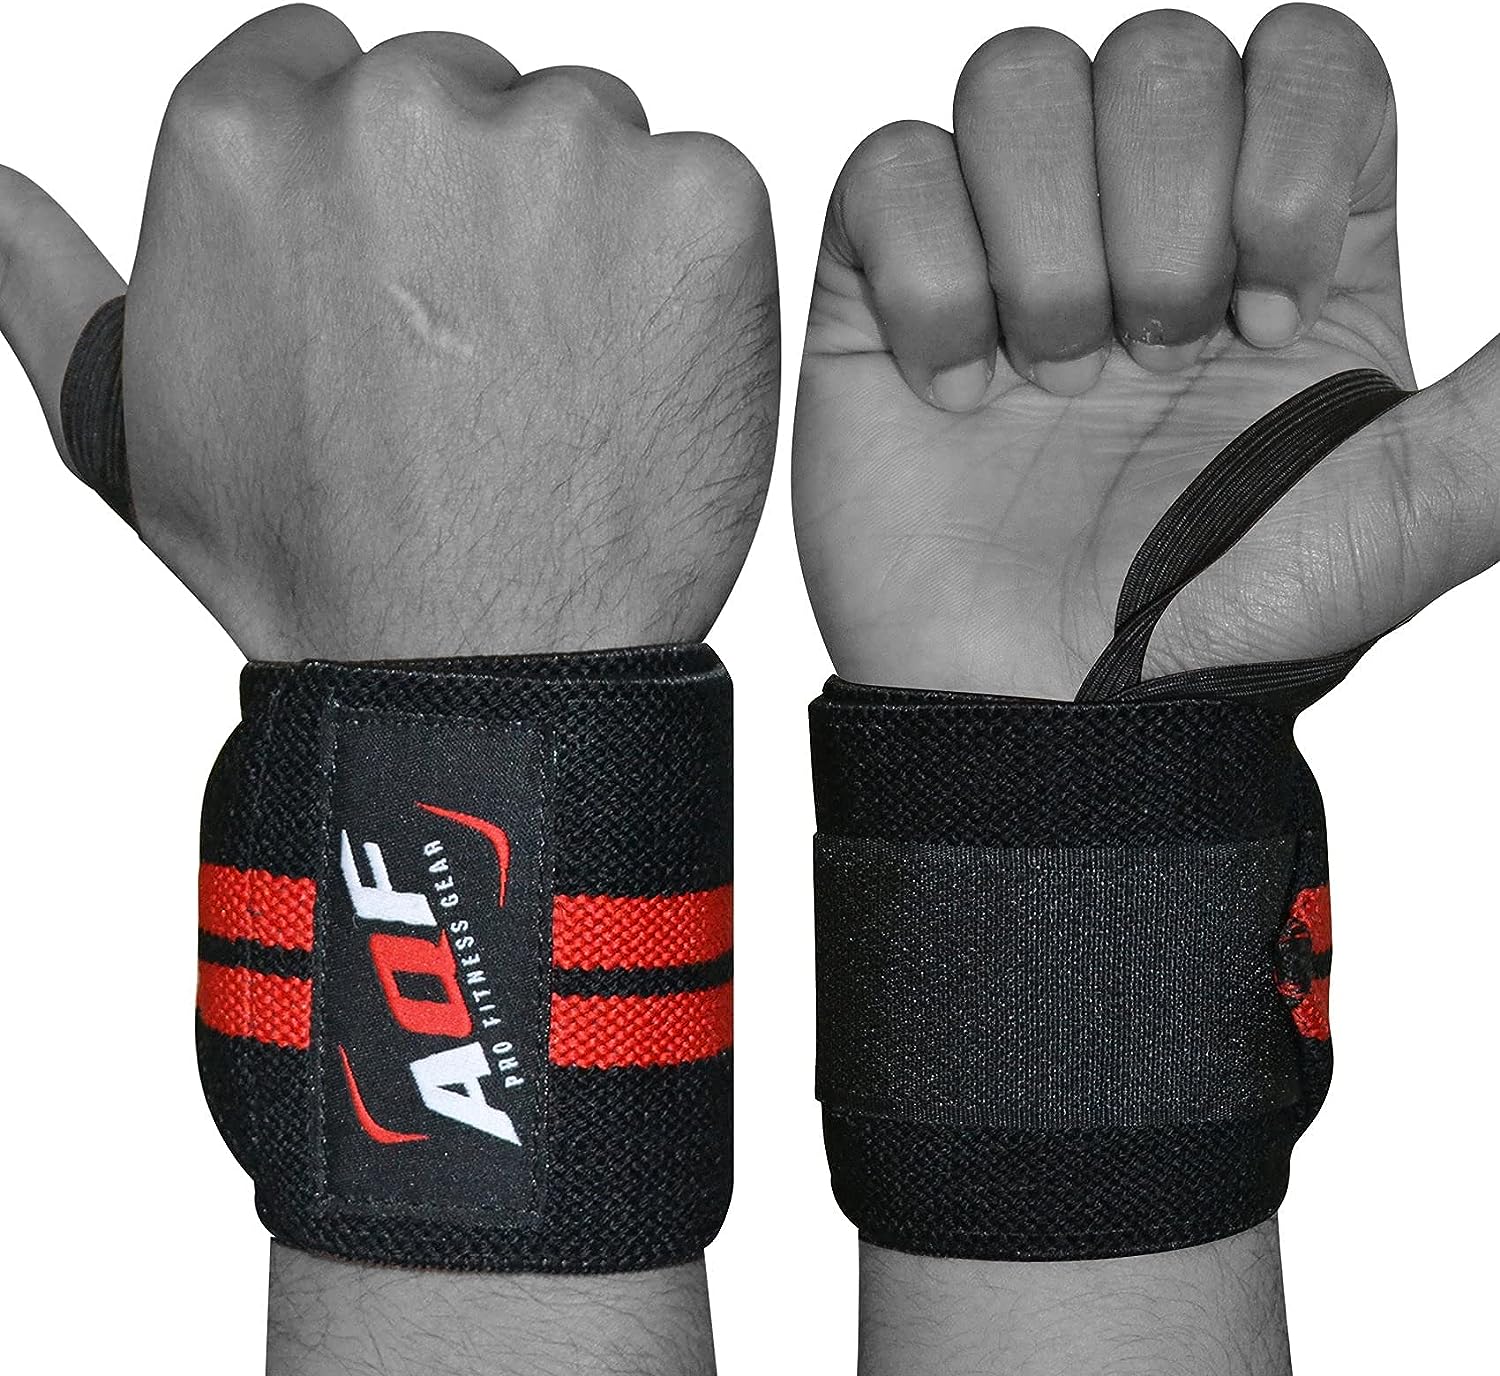 AQF Power Weight Lifting Wrist Wraps Supports Gym Training Fist Straps - Sold as Pair  One Size Fits All